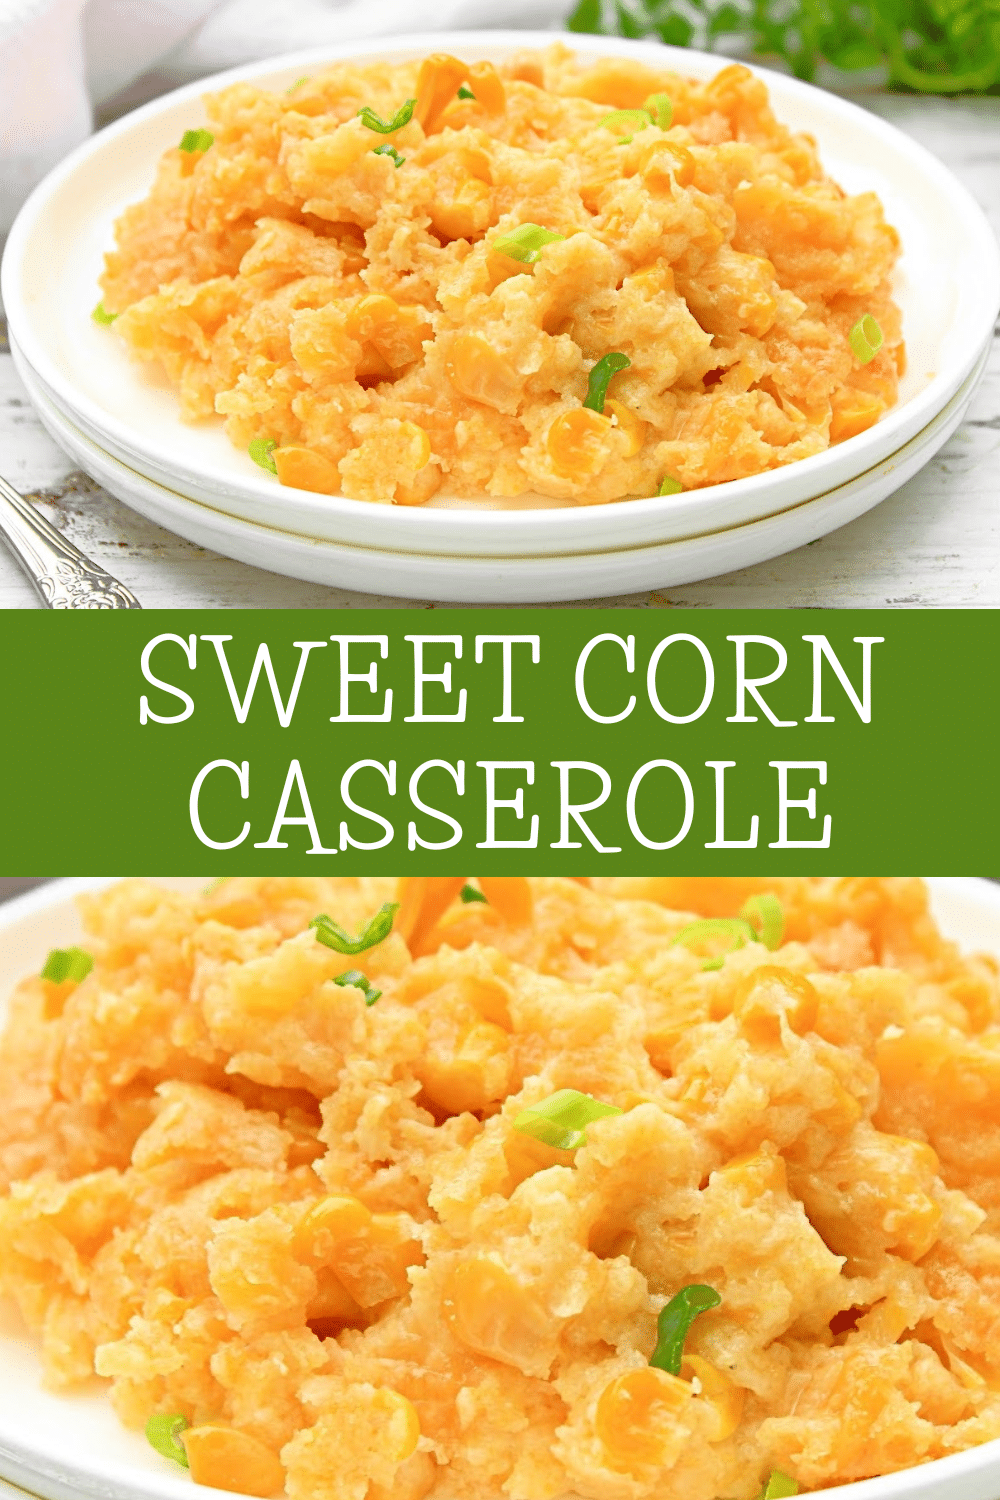 Sweet Corn Casserole ~ Sweet and creamy corn casserole is easy to make with simple ingredients. This Southern-style classic side dish is perfect for special occasions or a holiday dinner! via @thiswifecooks